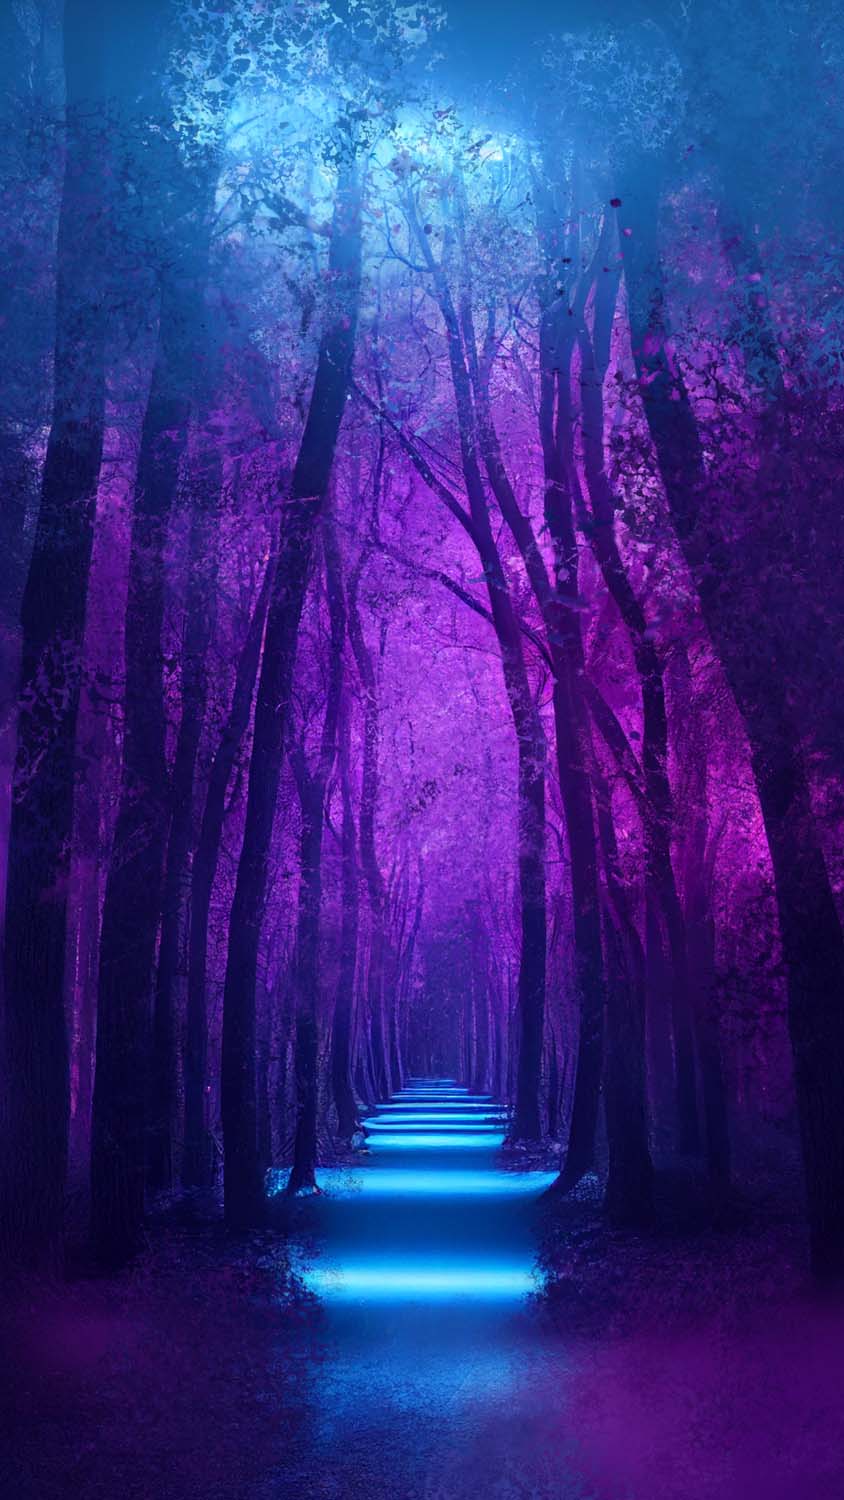 Cold Forest IPhone Wallpaper HD - IPhone Wallpapers : iPhone Wallpapers